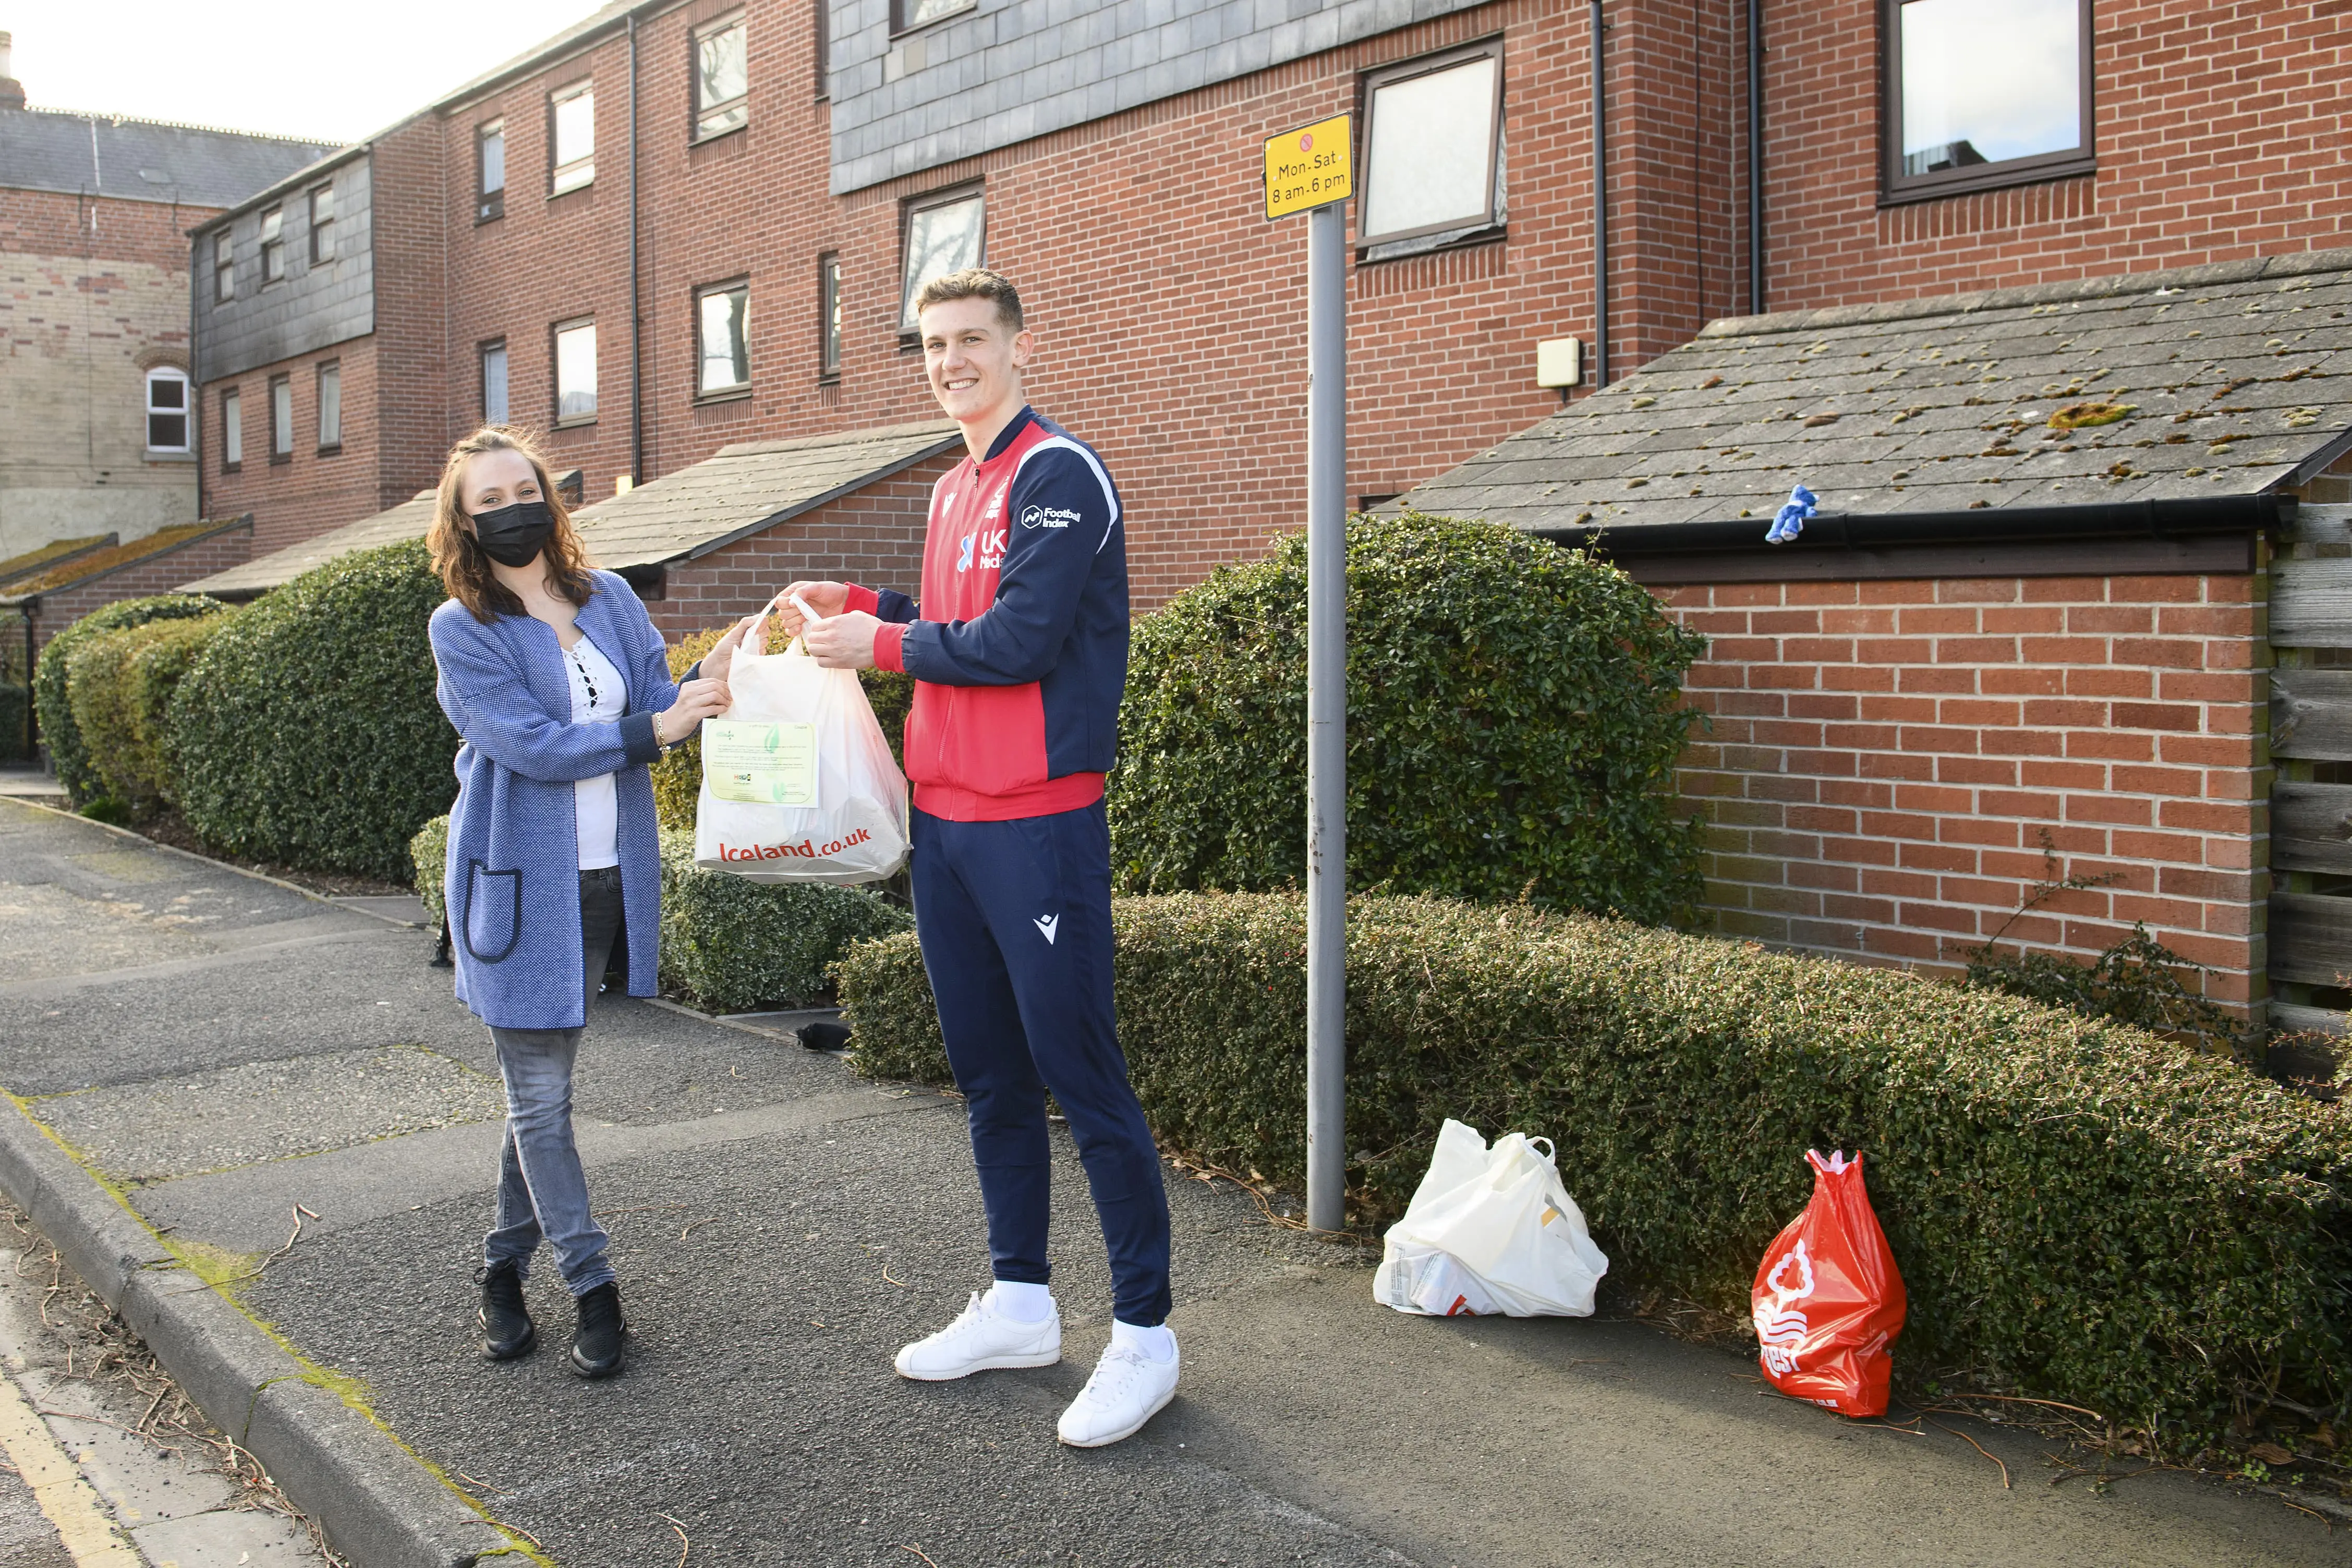 Nottingham forests ryan yates gives food parcel to local resident. This is the one millionth food parcel delivered by efl clubs scaled